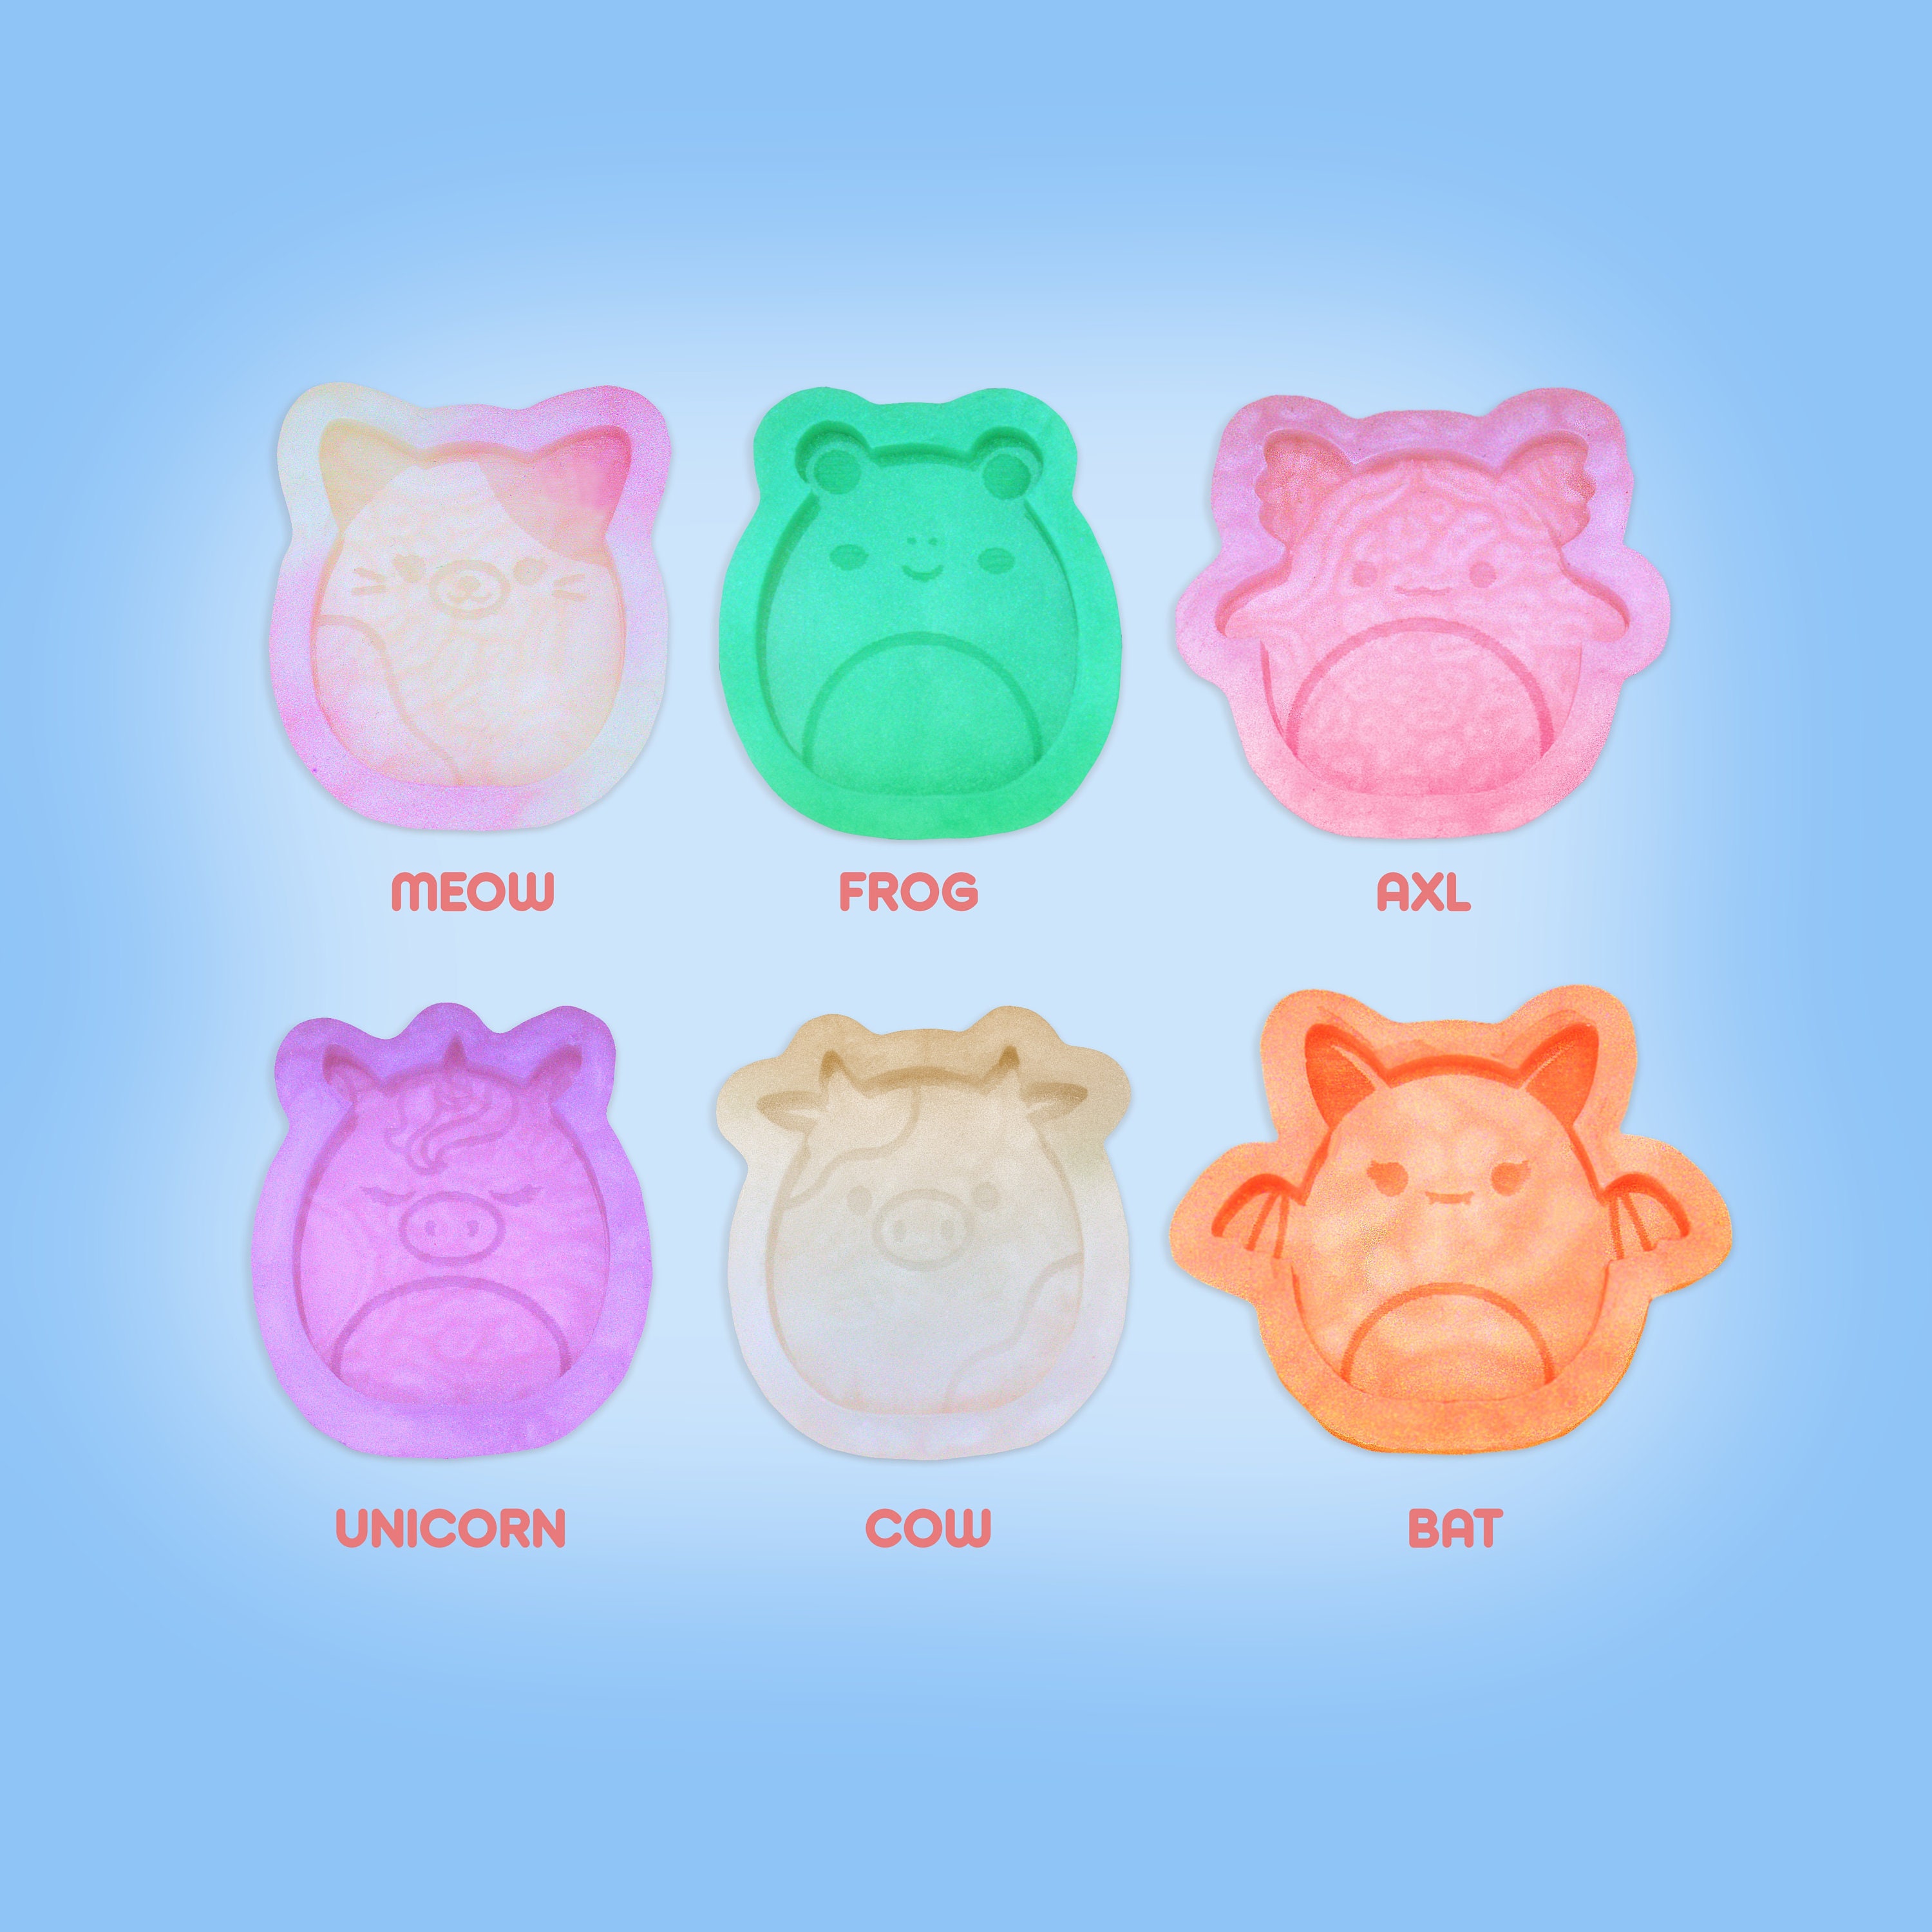 STL file squishmallow kawai pack 6 stl freshie molds - silicone